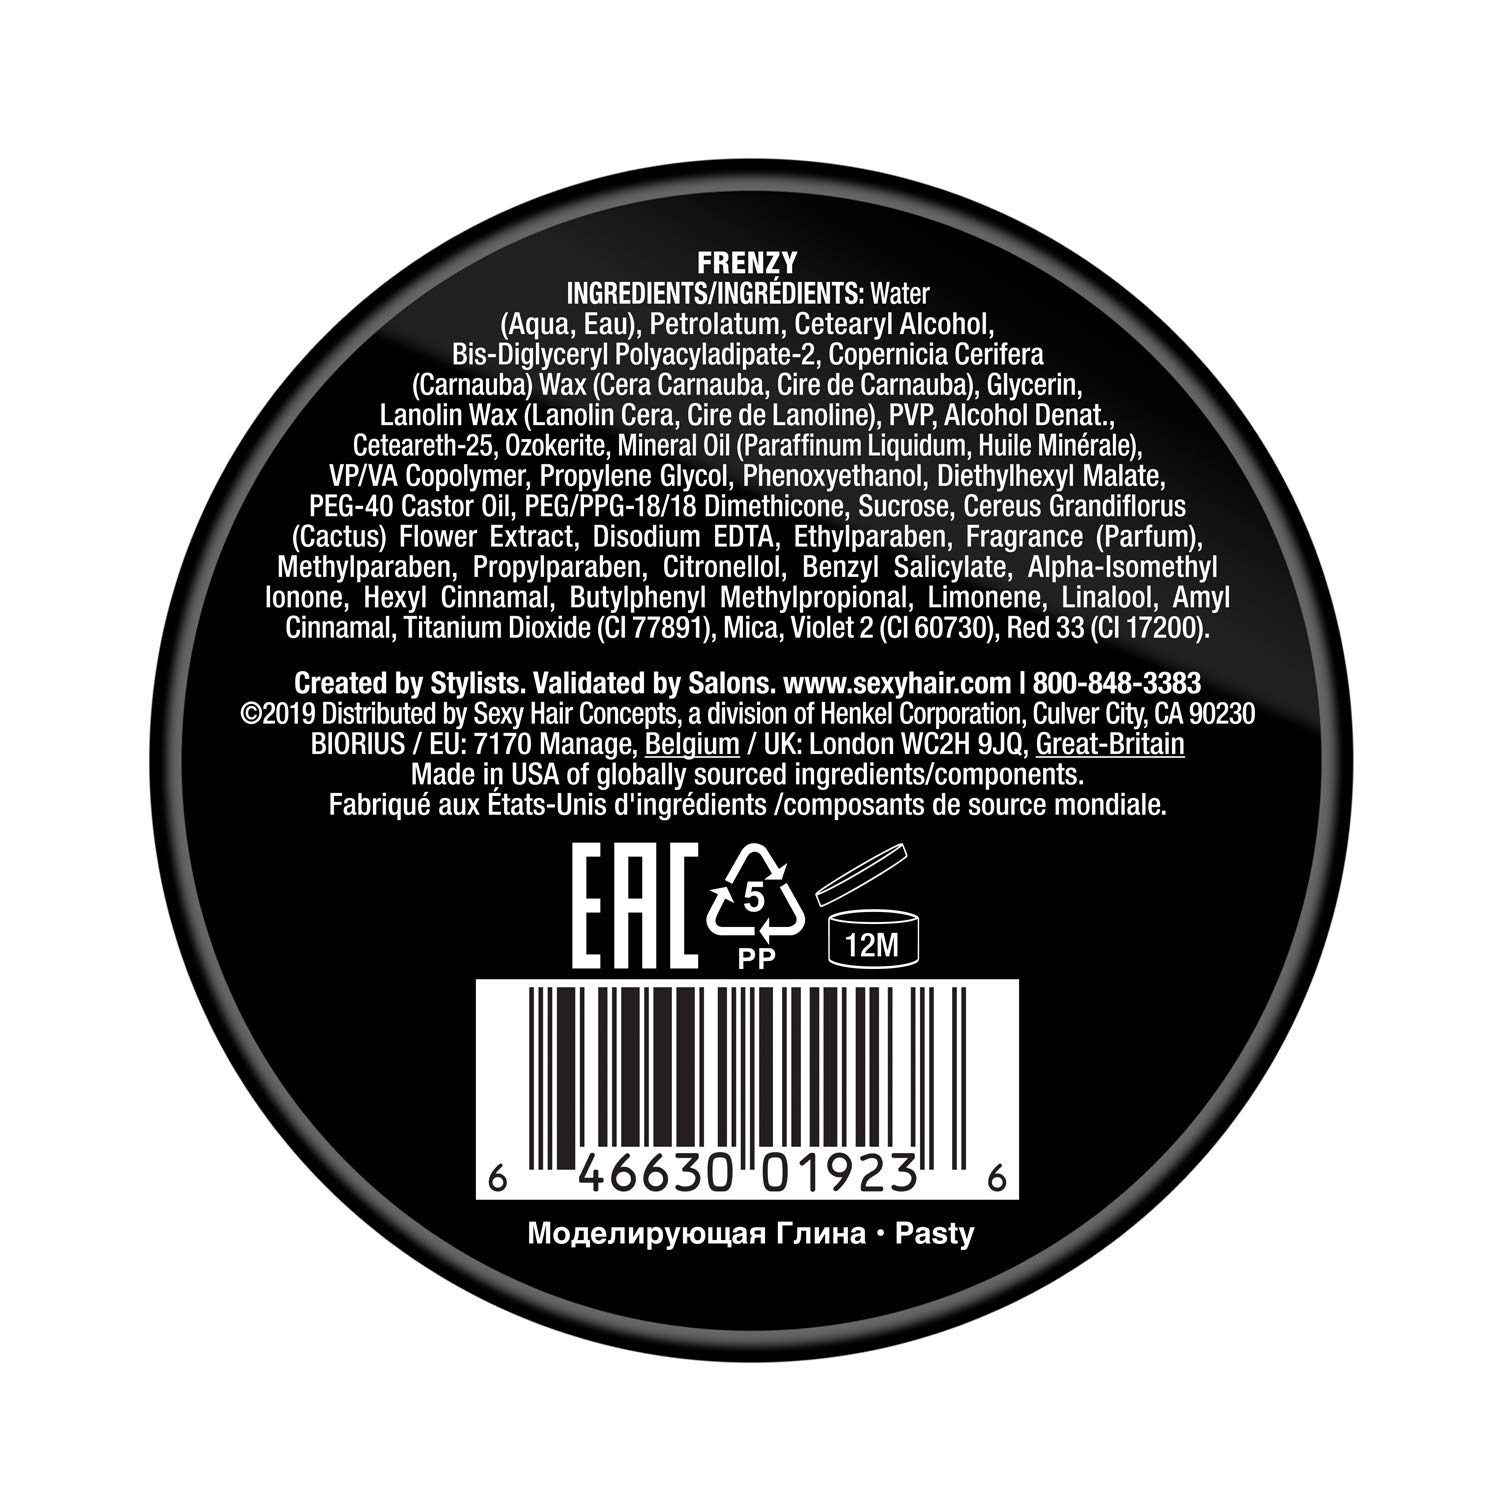 SexyHair Style Frenzy Matte Texturizing Paste, 2.5 Oz | Fullness, Texture and Definition | Helps Create Bulk | Semi-Matte - image 2 of 2